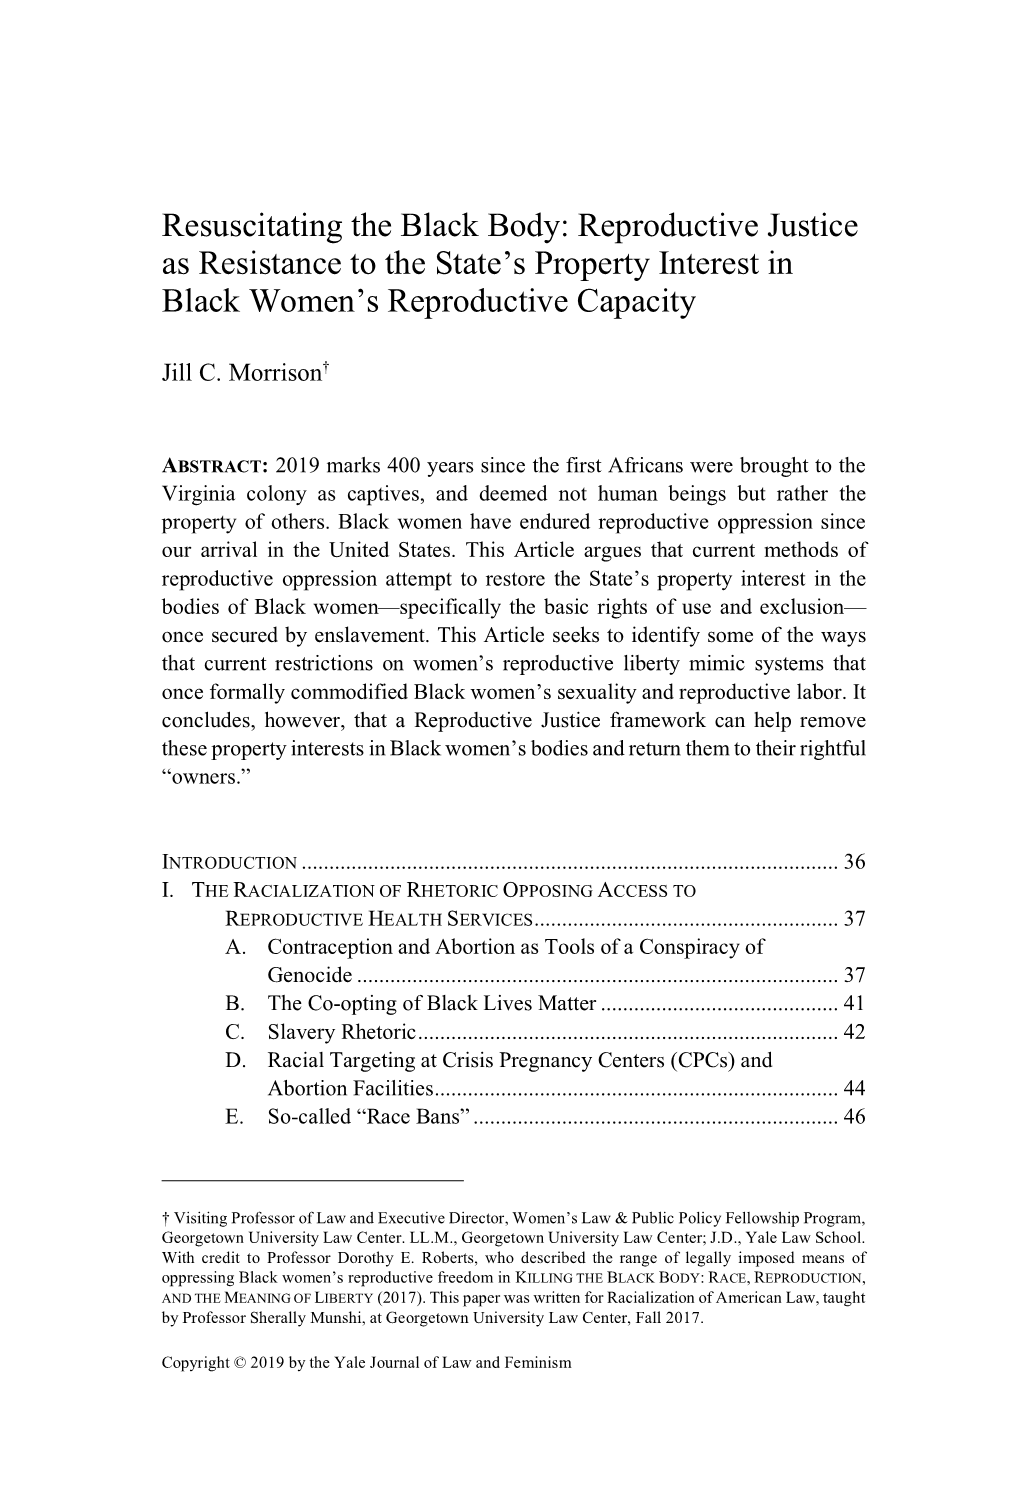 Resuscitating the Black Body: Reproductive Justice As Resistance to the State’S Property Interest in Black Women’S Reproductive Capacity